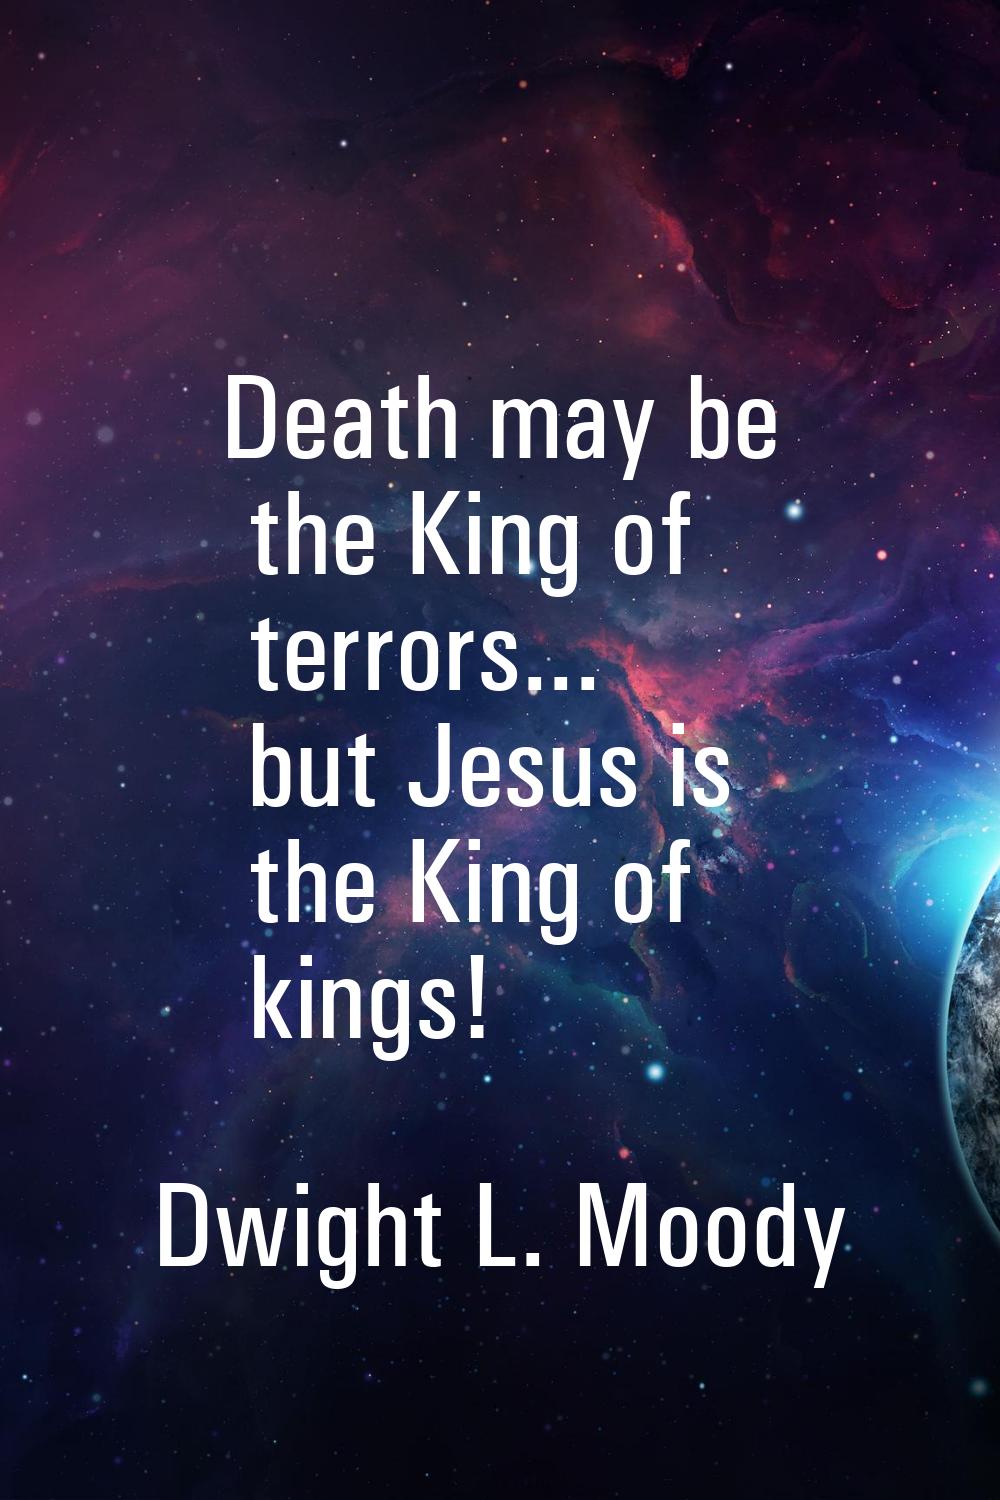 Death may be the King of terrors... but Jesus is the King of kings!